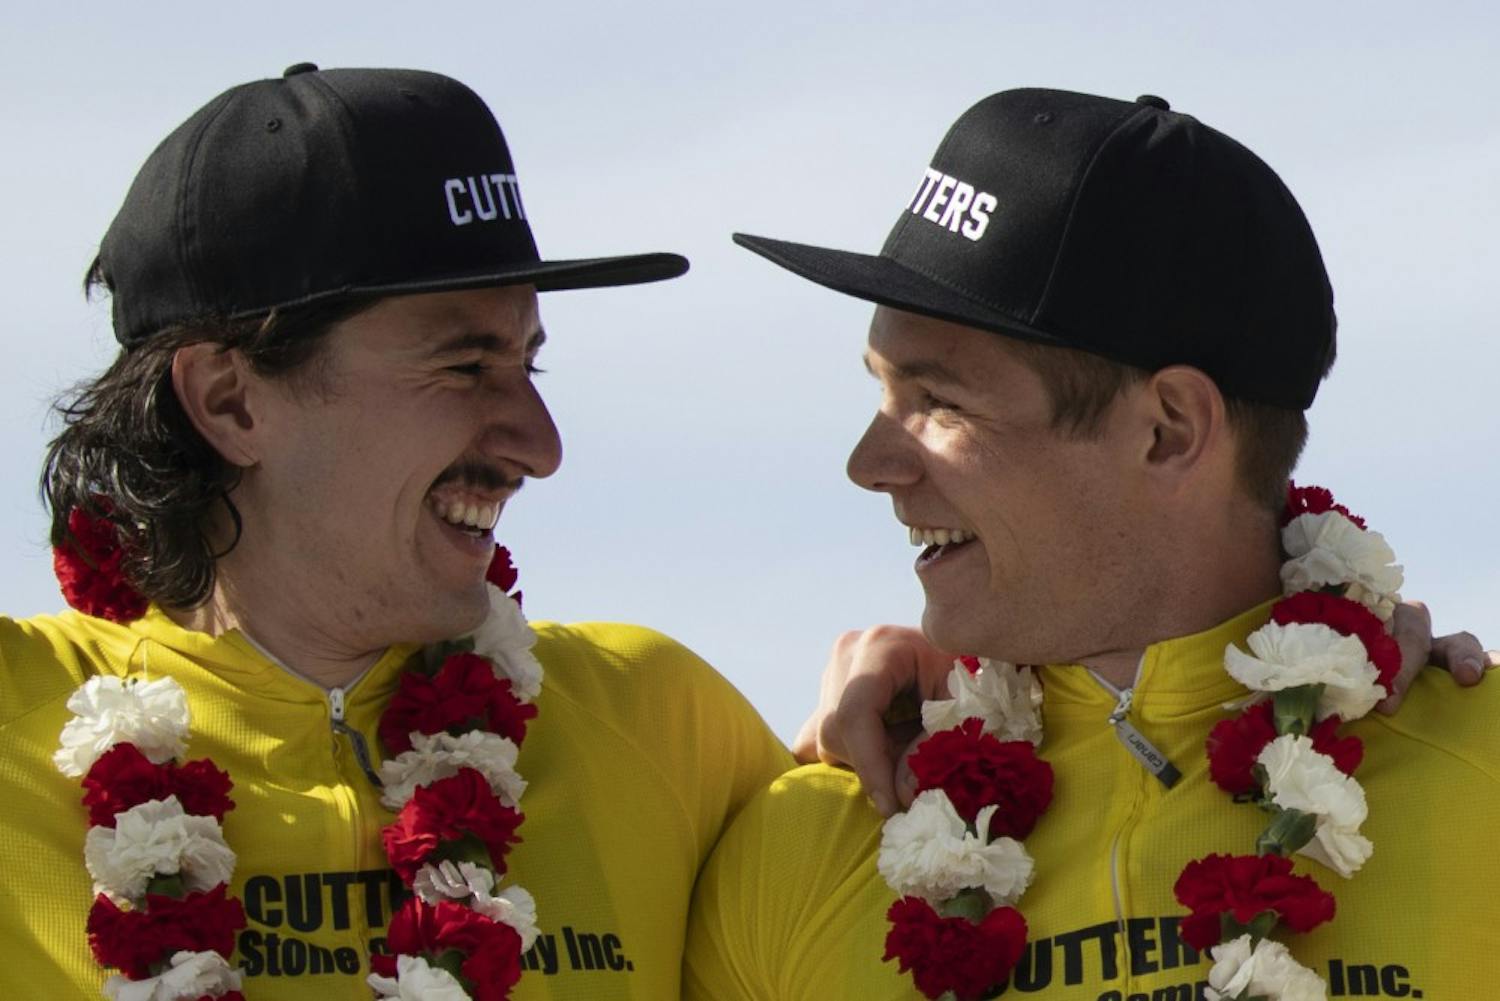 GALLERY: Cutters finishes first in the 2019 Men's Little 500